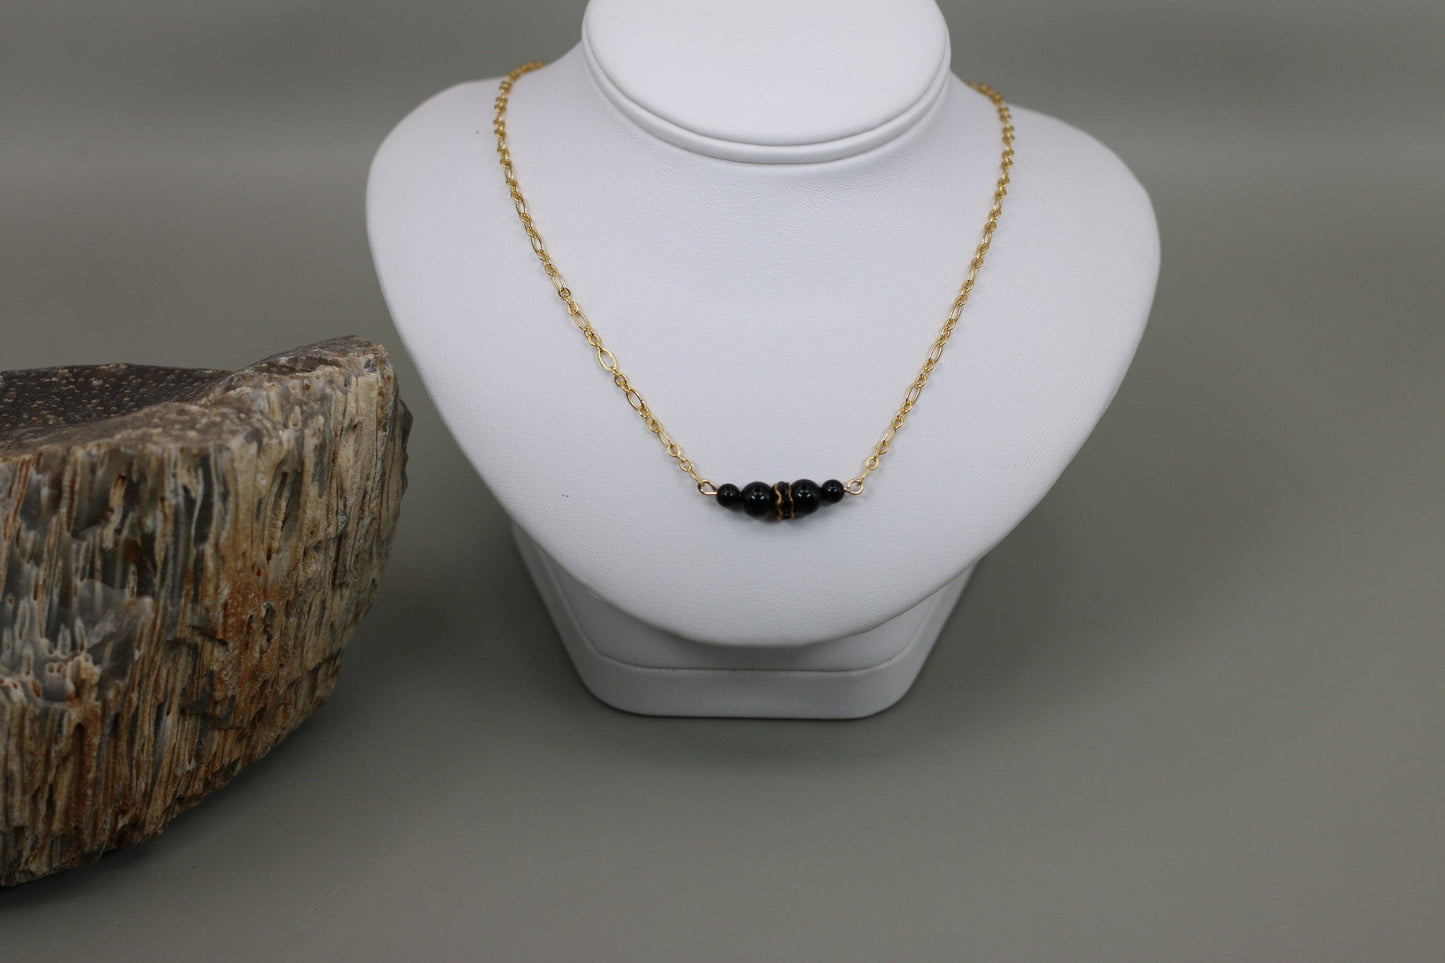 Magic Black Preciosa Czech Pearls with Jet Black Crystal Rondelles - Annabel's Jewelry & Leather